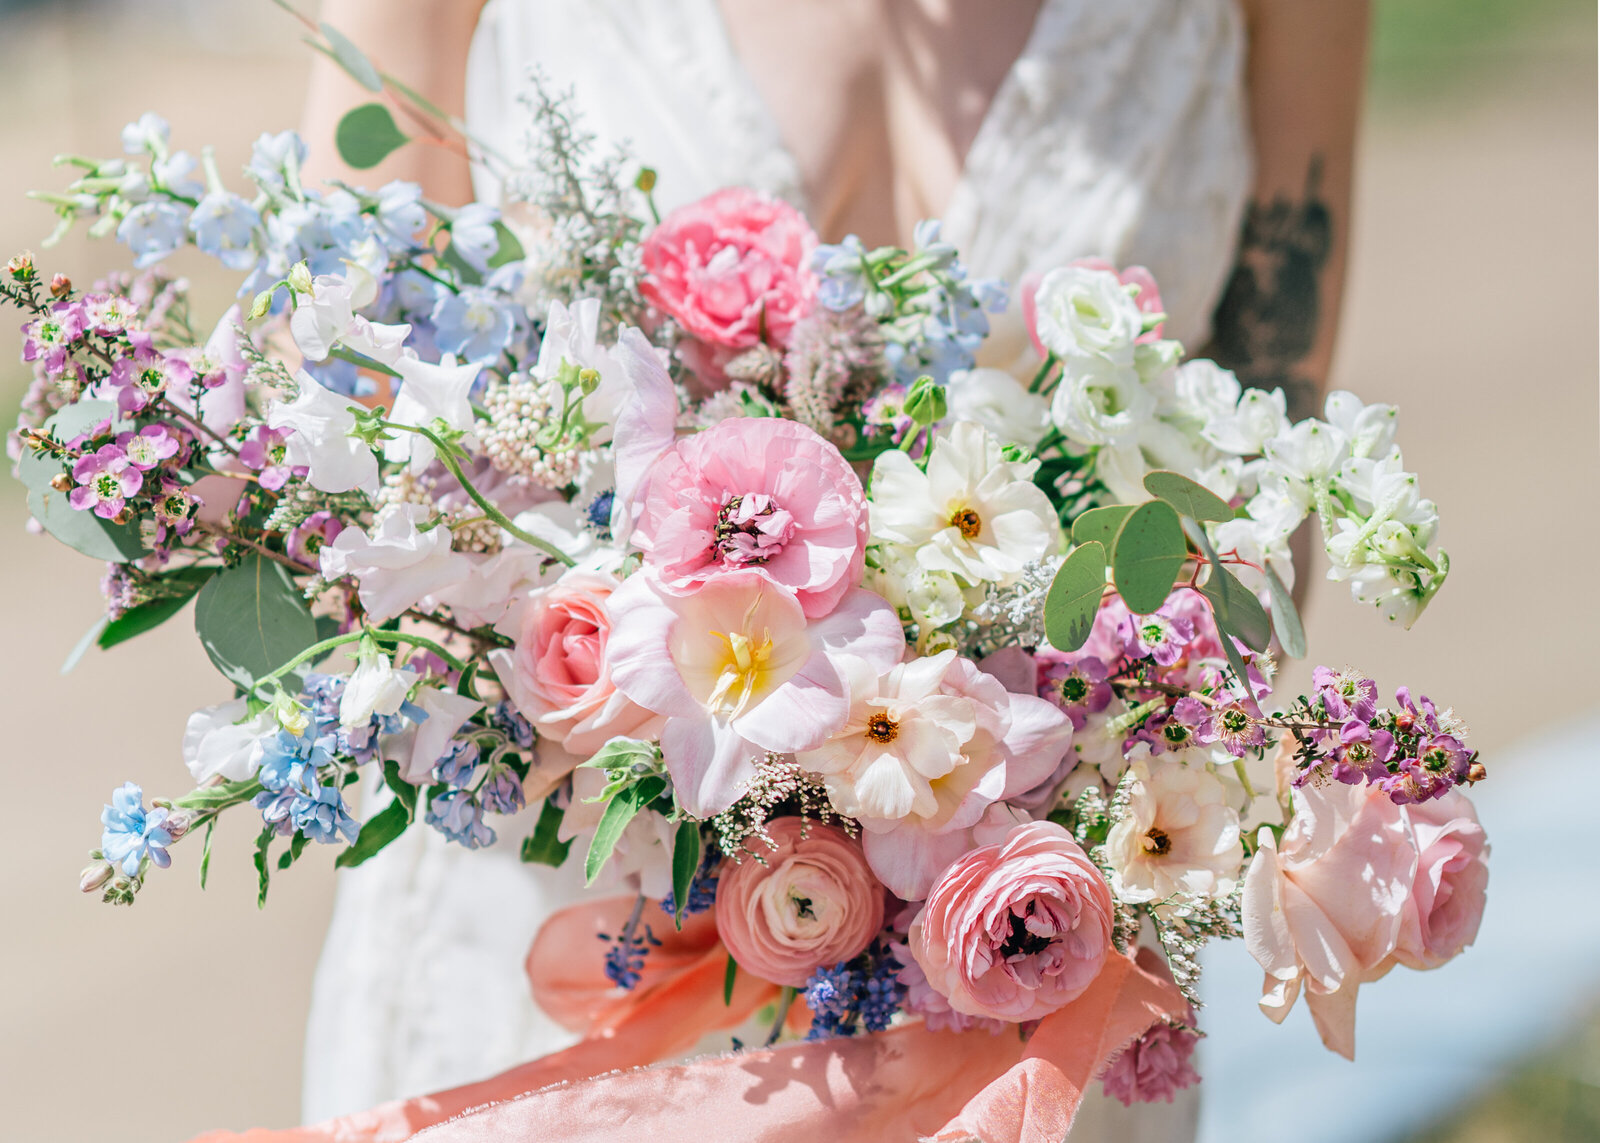 Beautiful floral bouquet at Denver wedding by photographer Erin Winter